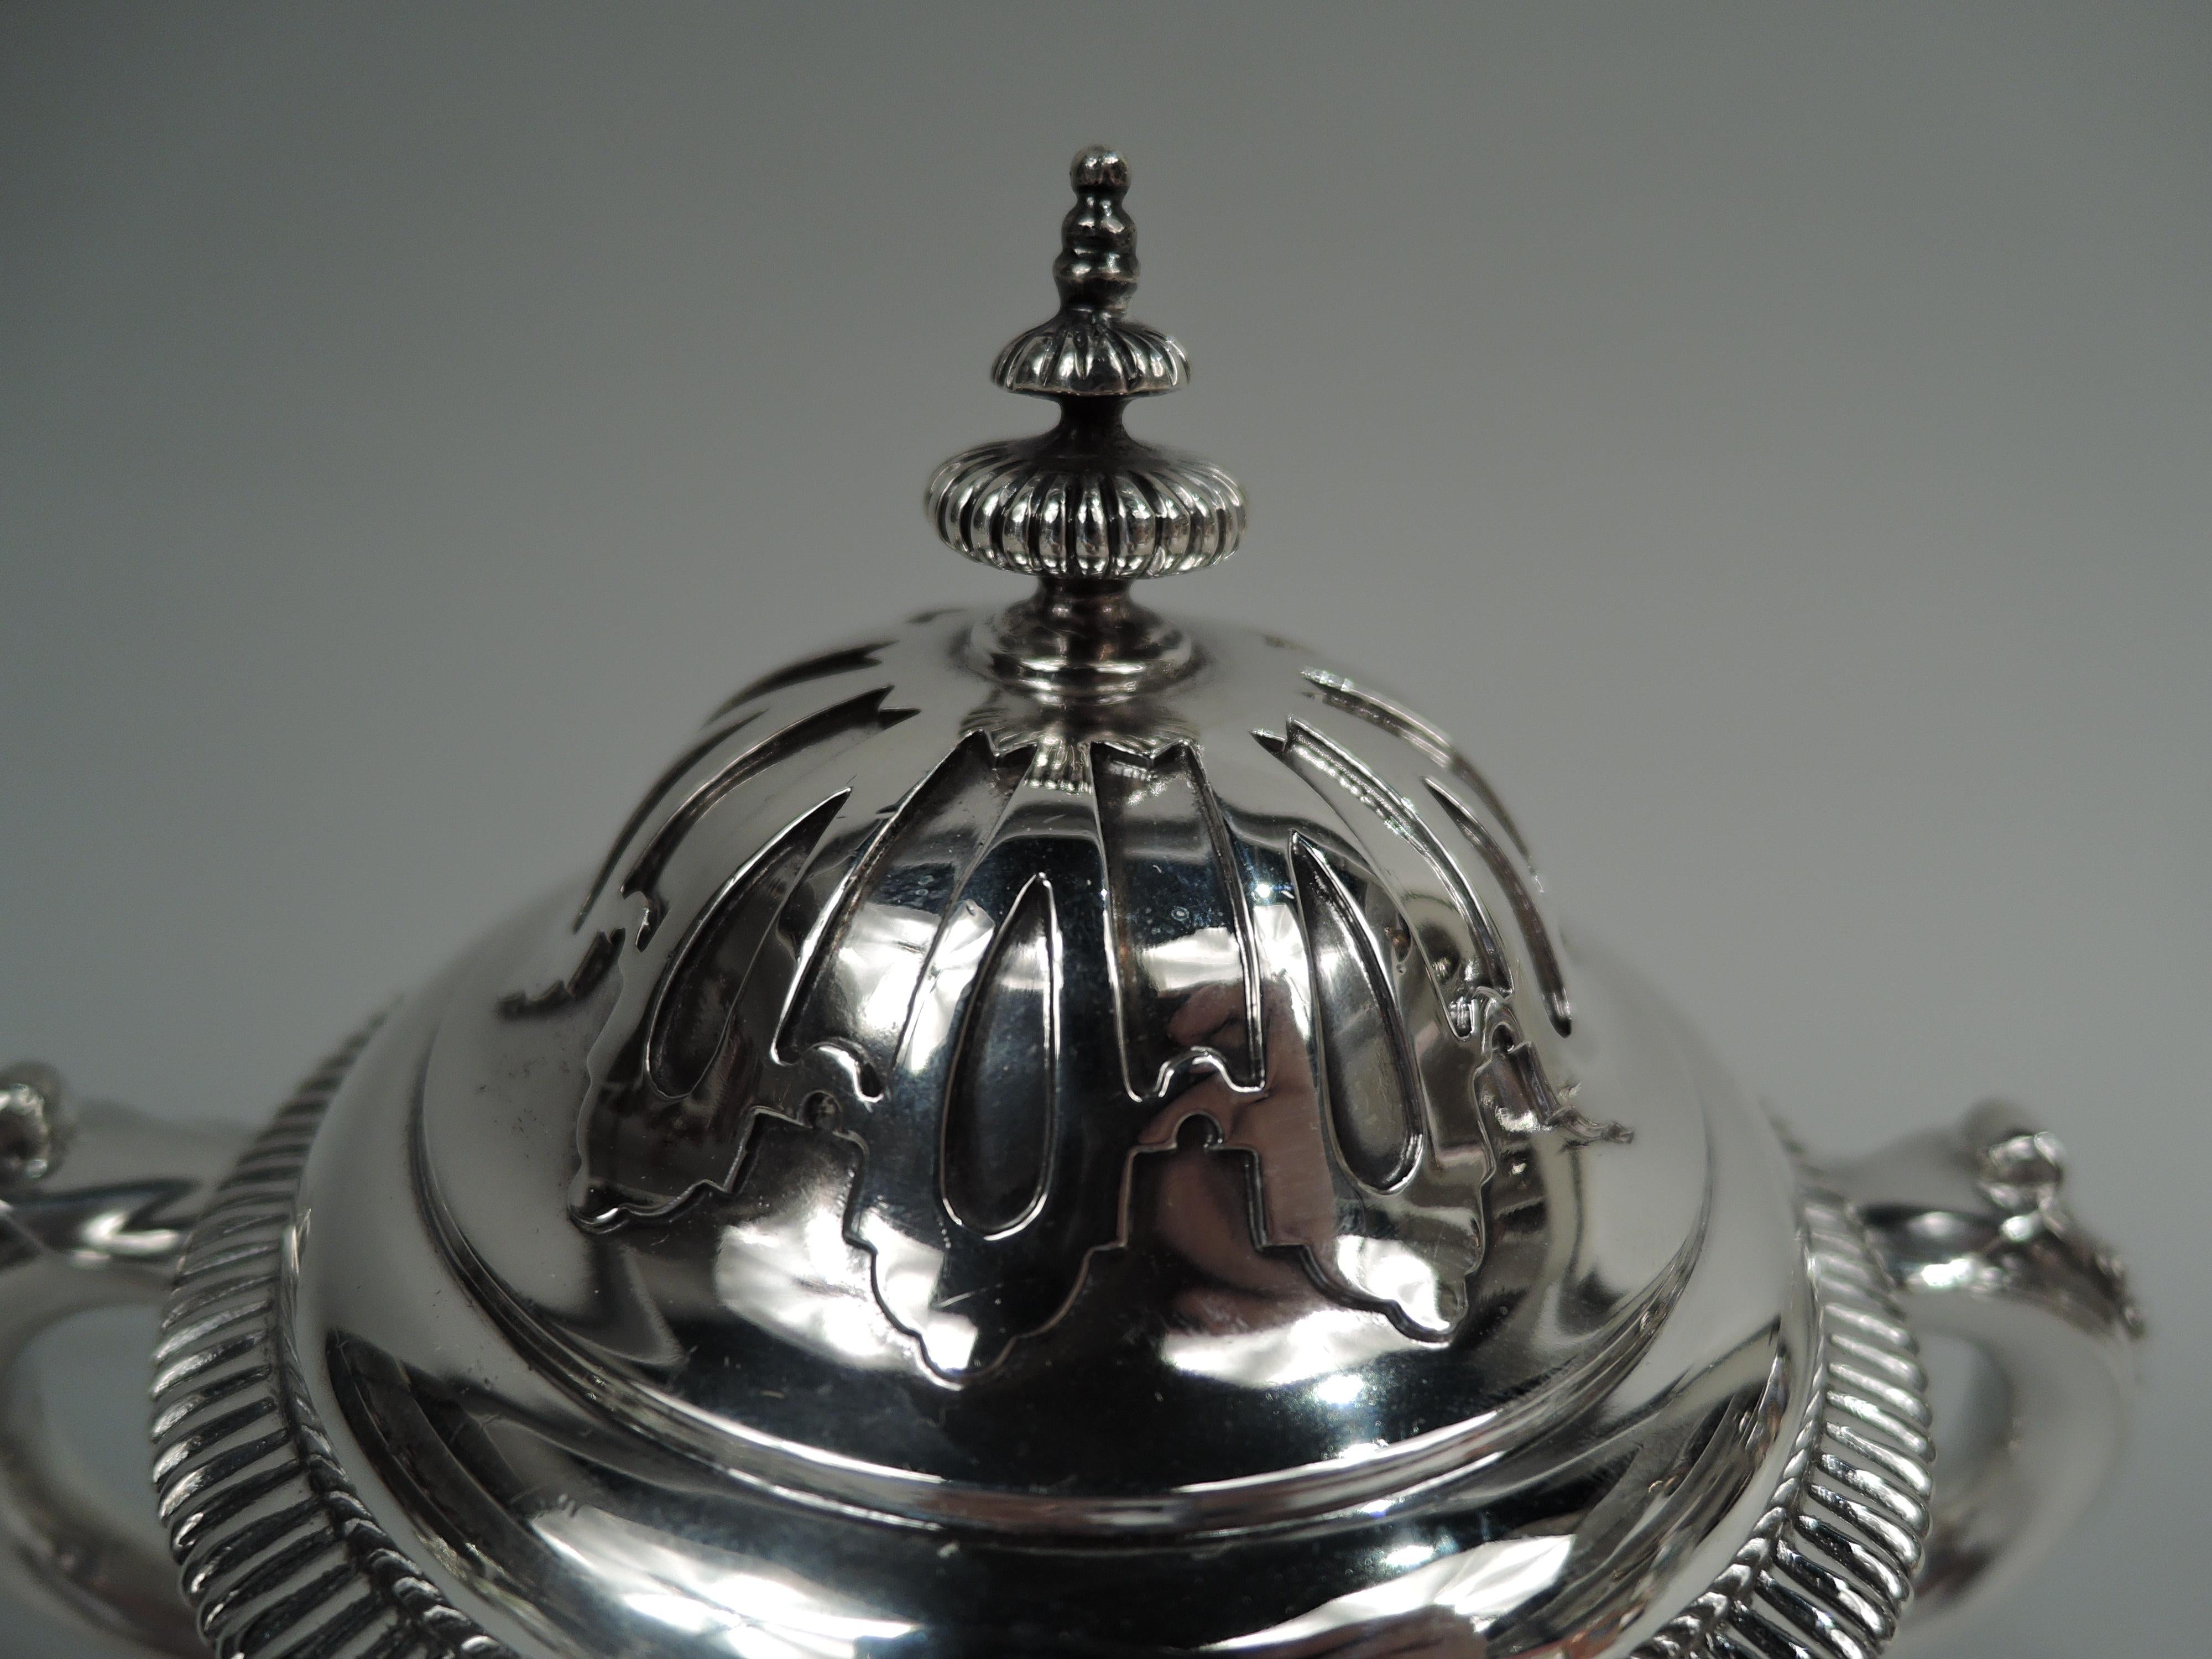 Neoclassical Revival Crichton English Neoclassical Britannia Silver Covered Urn, 1930 For Sale